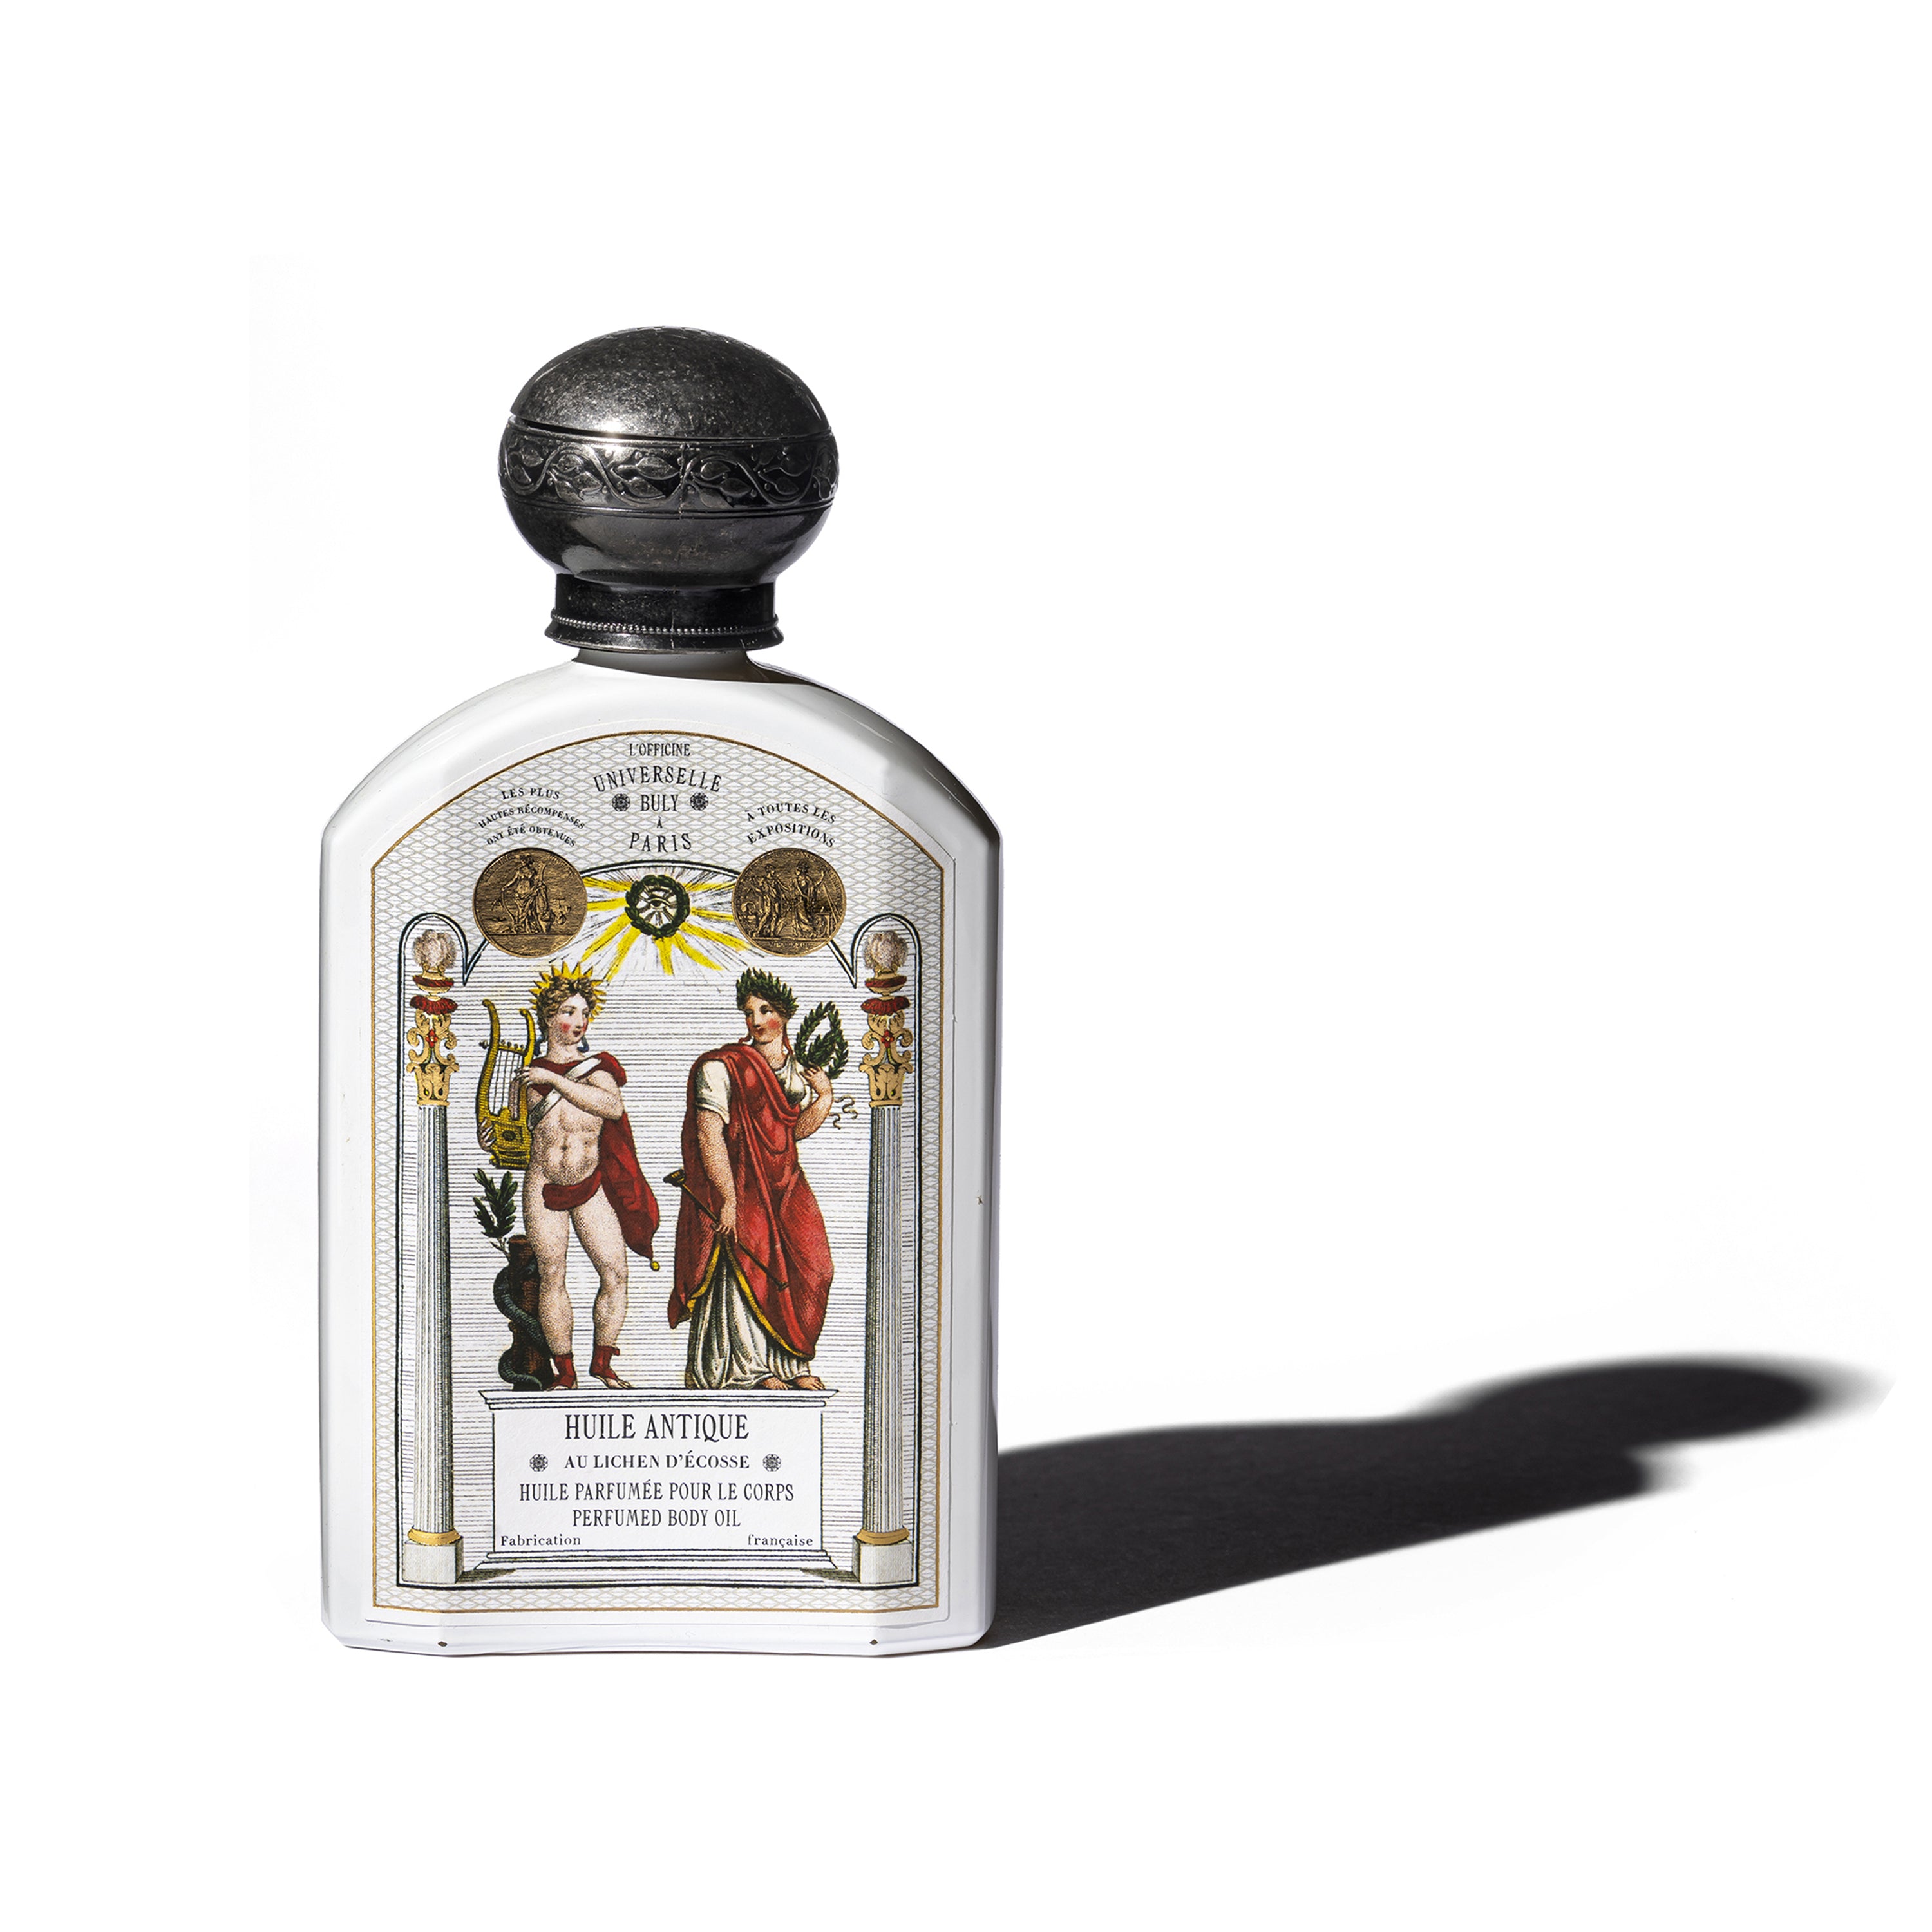 Officine Universelle Buly ユイルアンティーク190ml